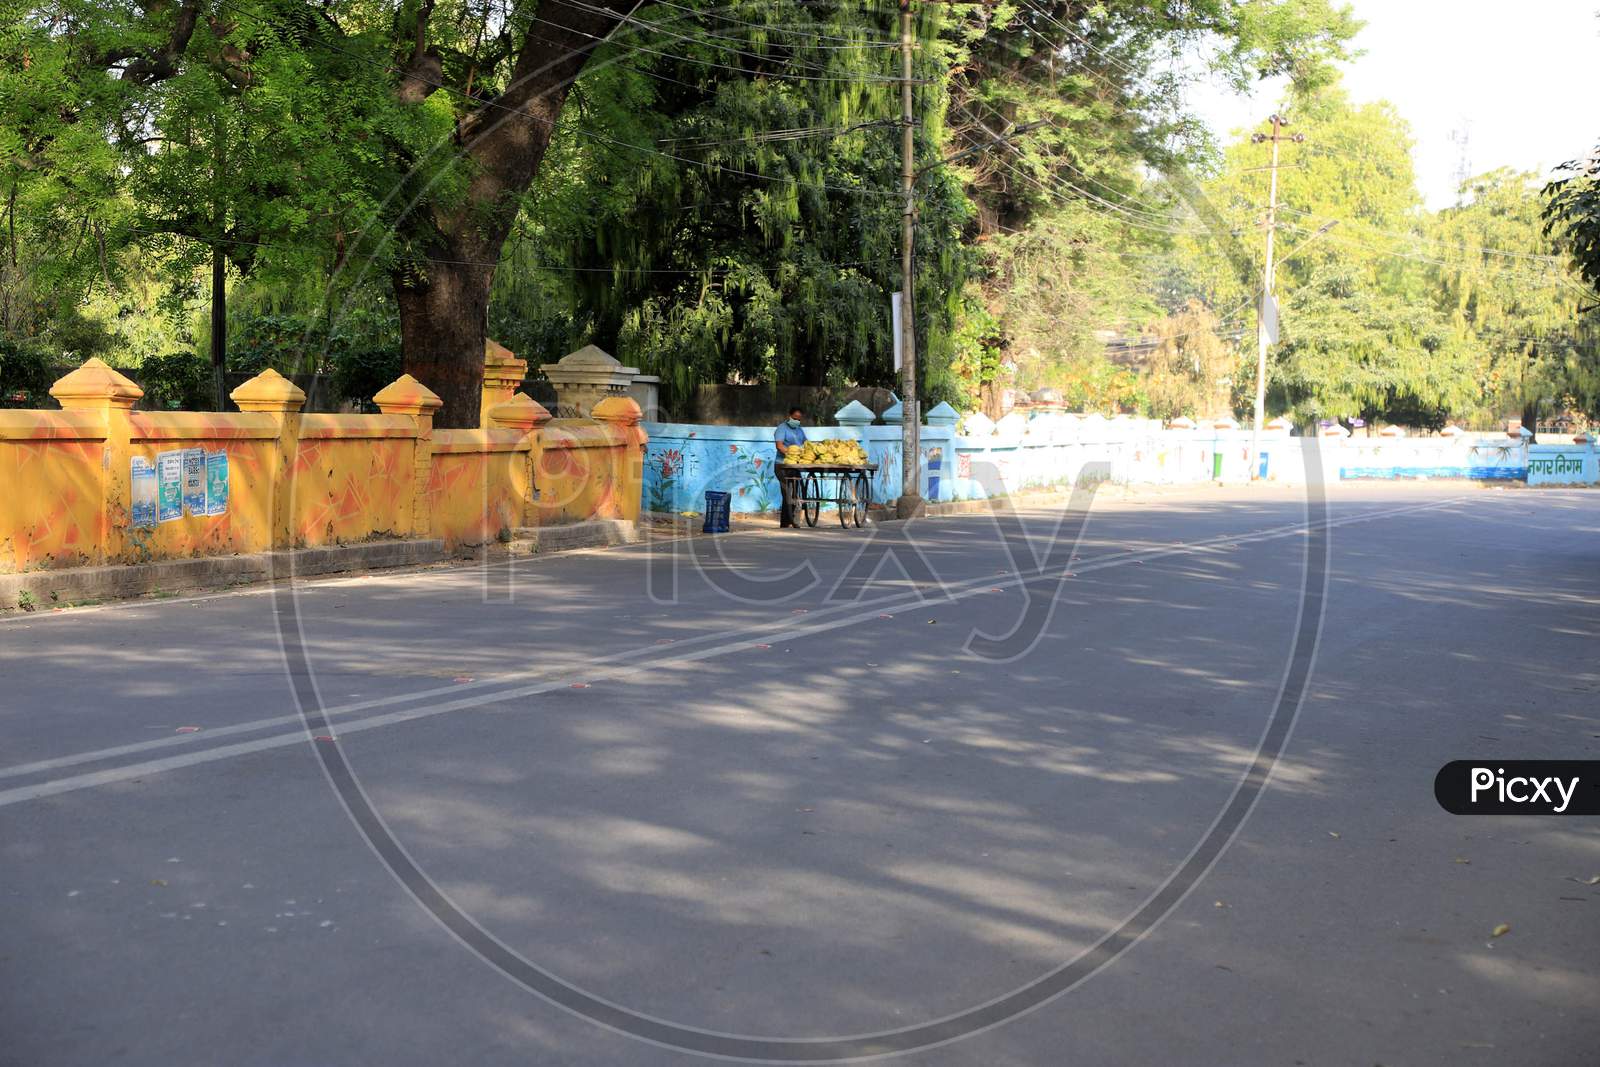 A Vendor Stand On The Empty Road  During Nationwide Lockdown In Wake Of Coronavirus Pandemic In Prayagraj, March 10, 2020.